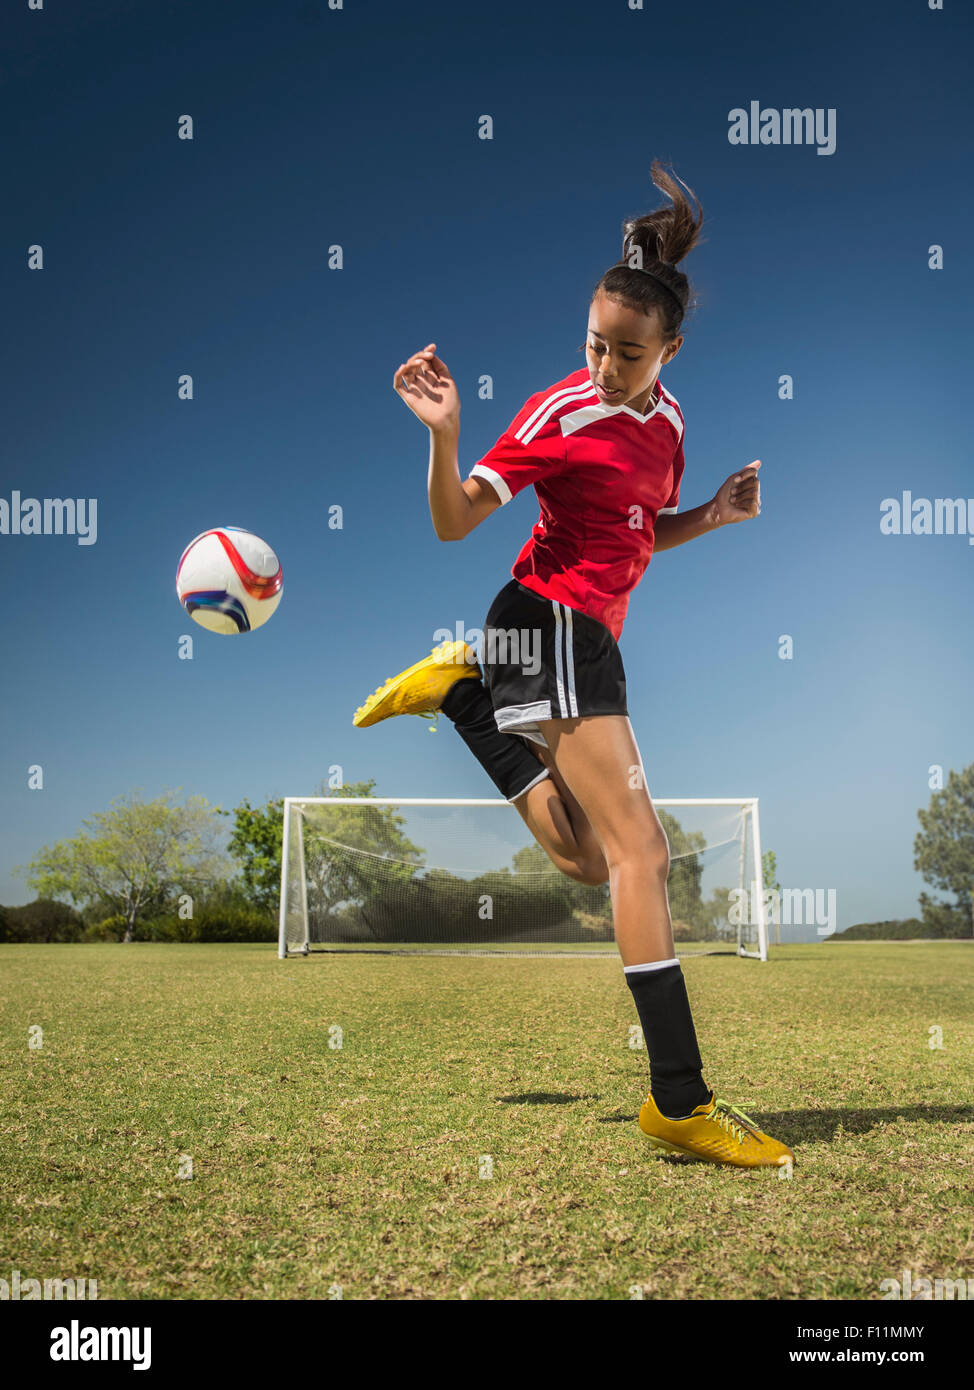 Race mixte soccer player kicking ball on field Banque D'Images